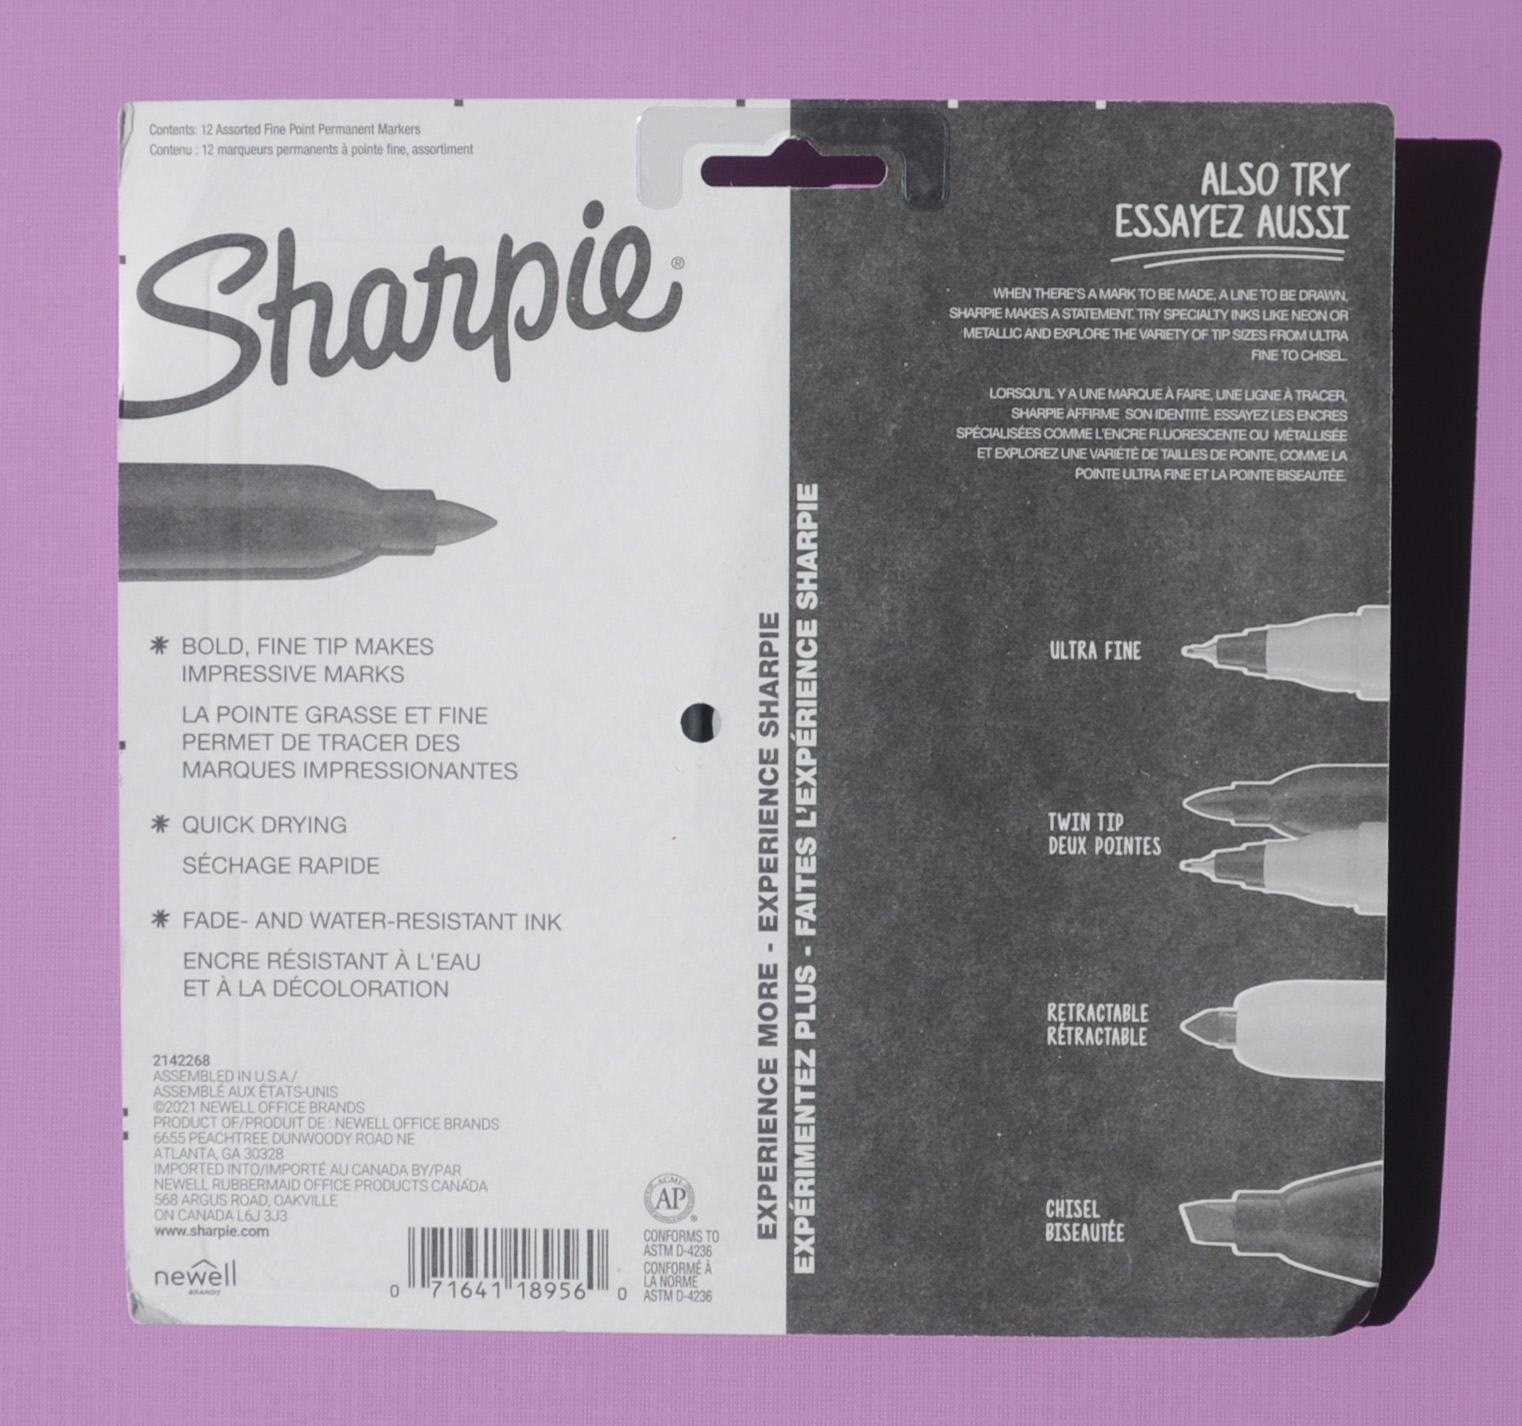 Sharpie Mystic Gems Fine and Ultra Fine Markers, 12 and 24 count